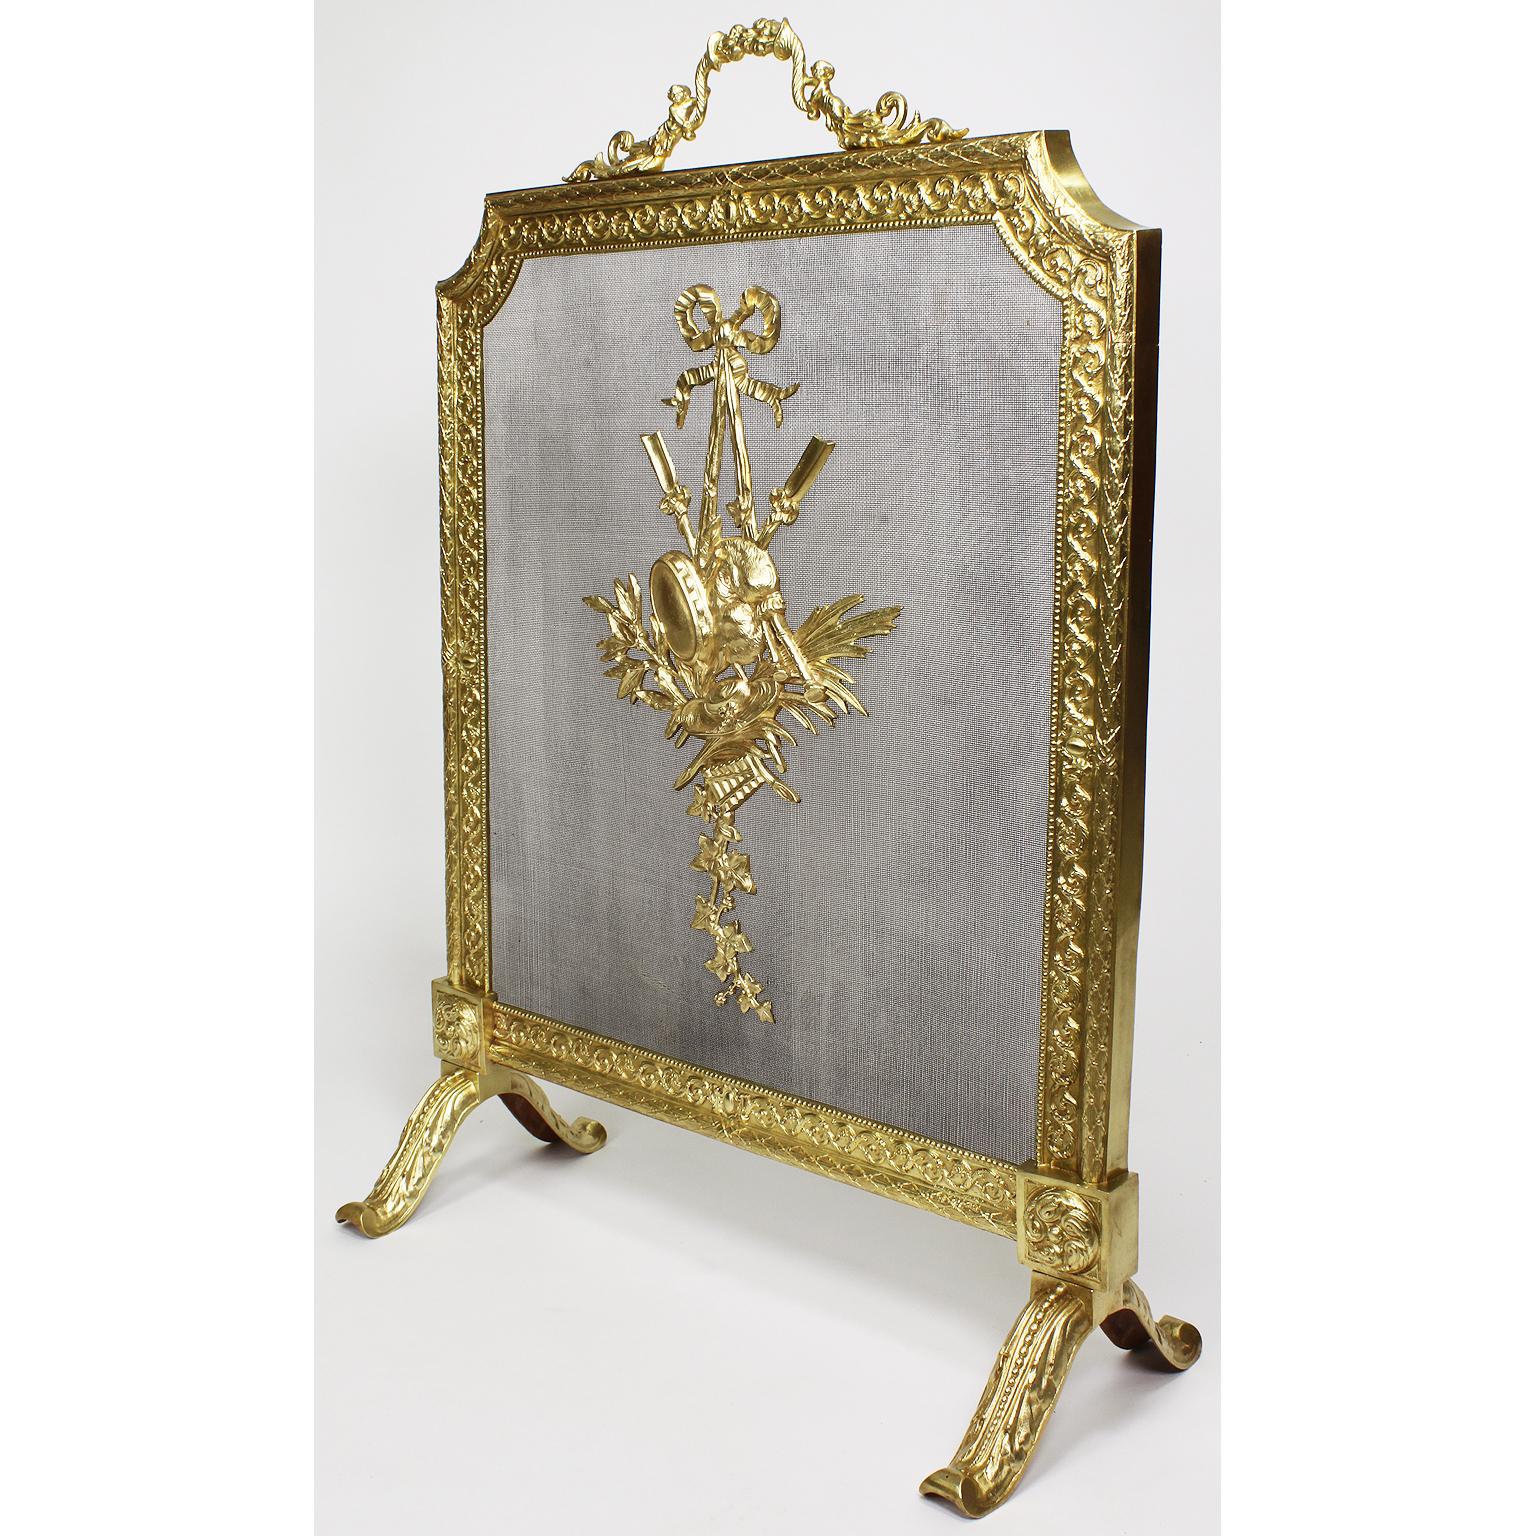 A French 19th-20th century Louis XVI style gilt metal fireplace screen. The ornately decorated screen topped with a twin-putti handle with a floral cornucopia, the floral border with a metal screen mesh centered with an allegorical shield